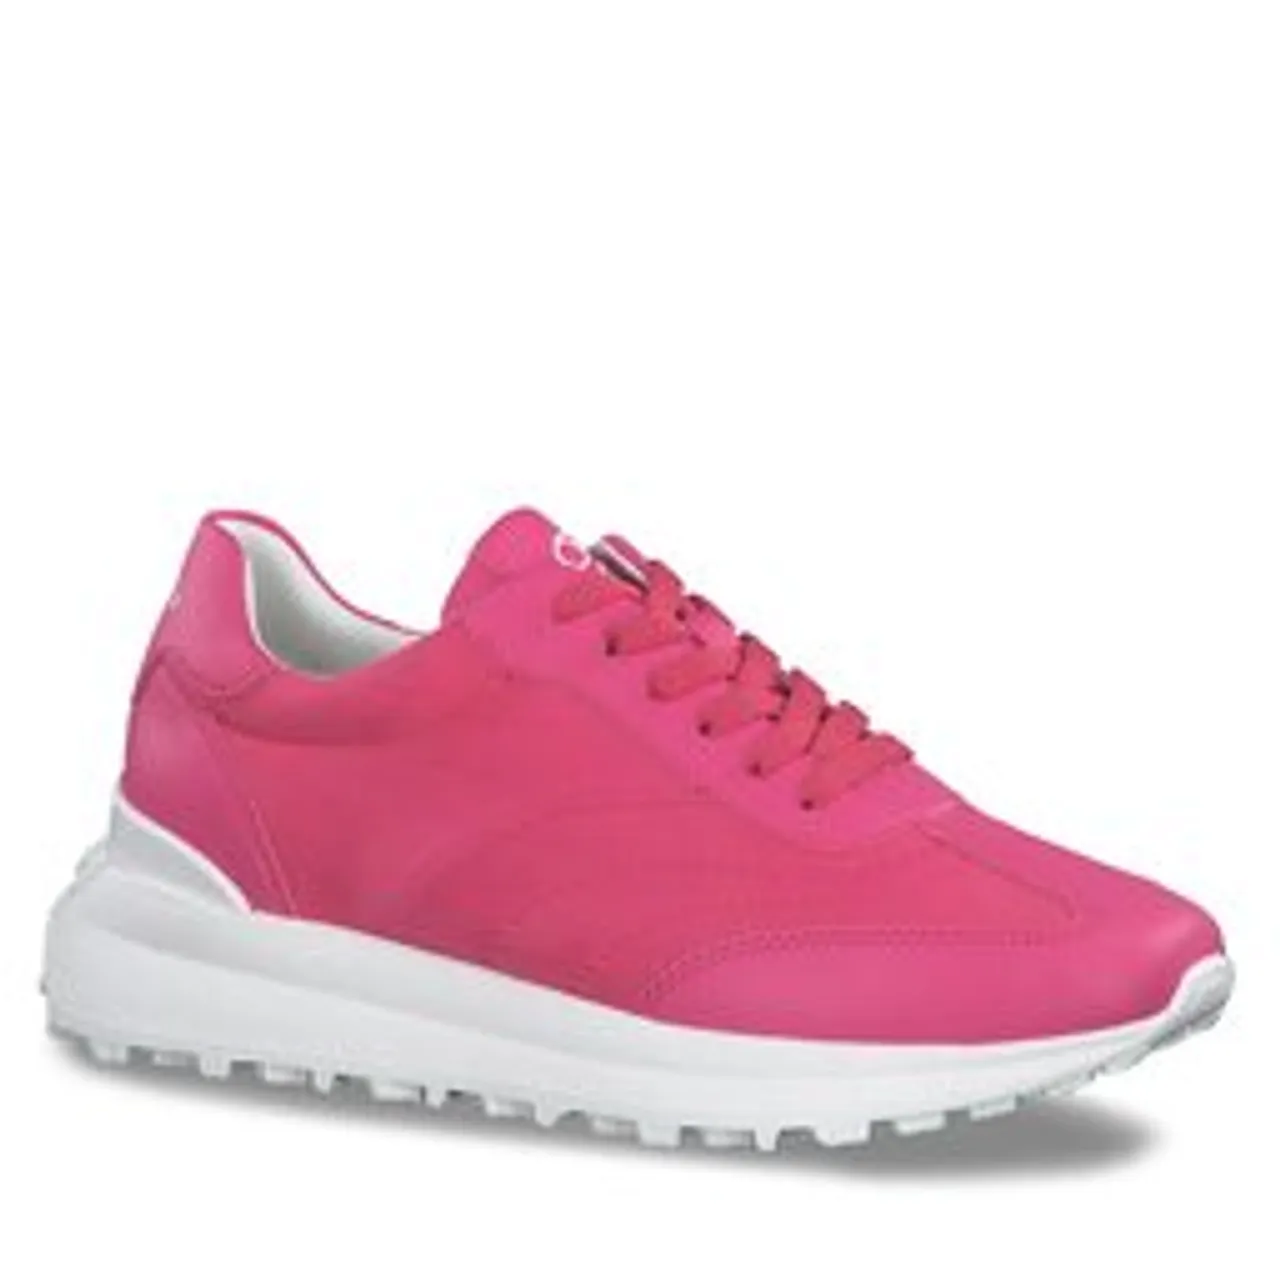 Sneakers s.Oliver 5-23605-30 Fuxia 532